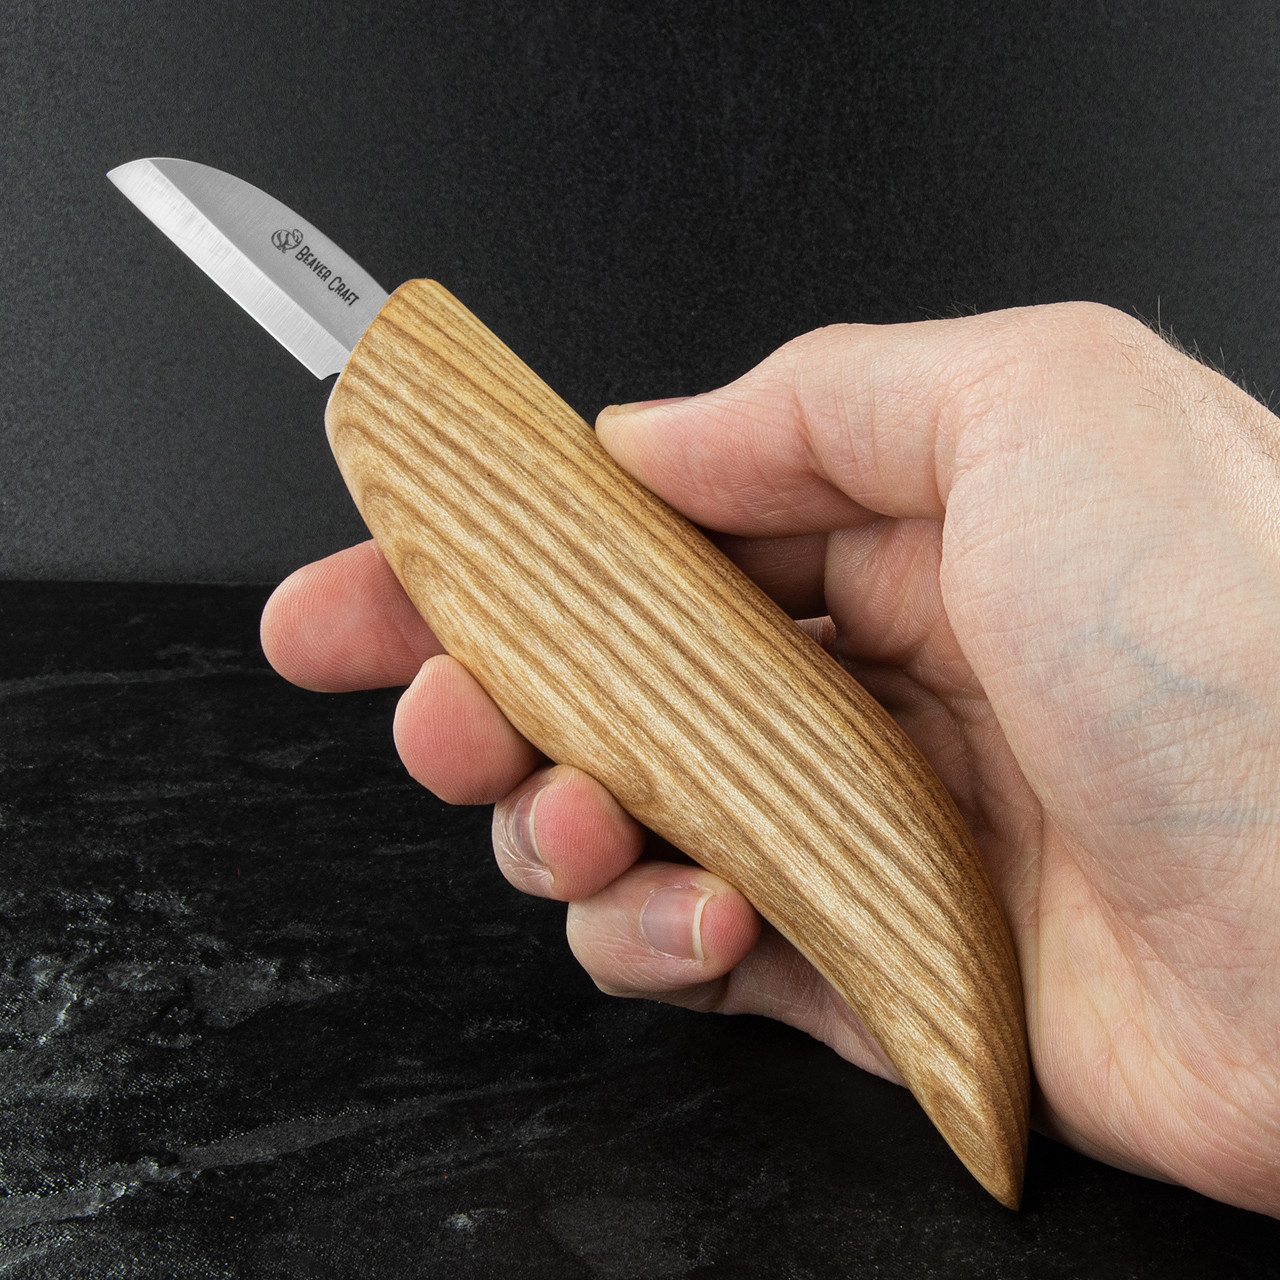 BeaverCraft Chip Carving Knives Set - 2 Knives Plus Accessories by Woodcraft